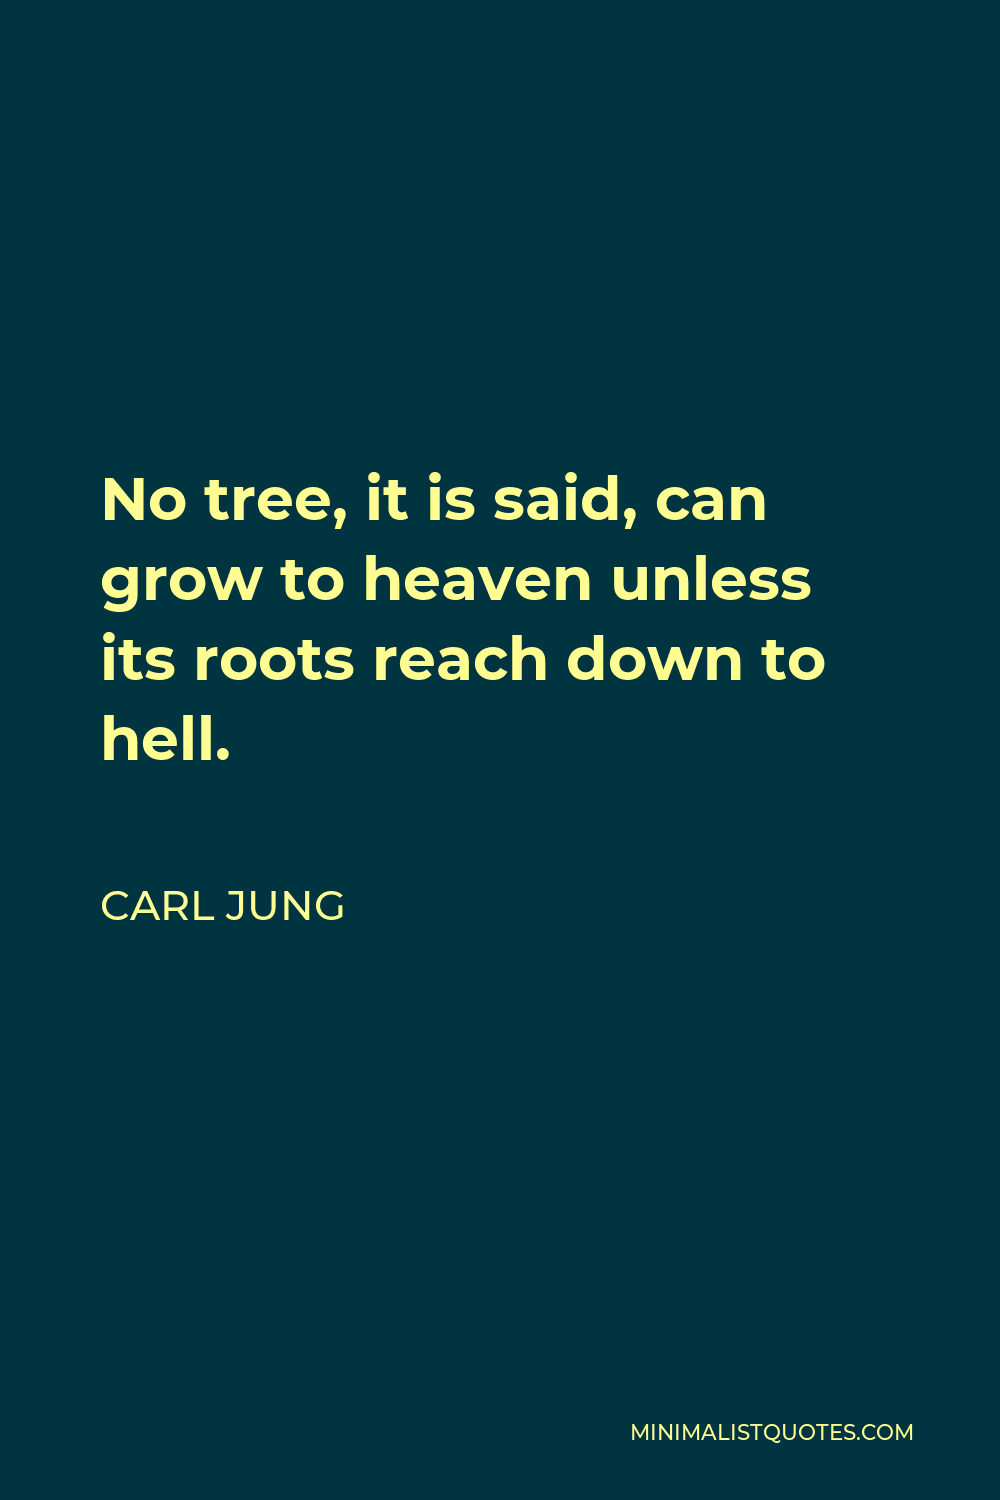 Carl Jung Quote - No tree, it is said, can grow to heaven unless its roots reach down to hell.